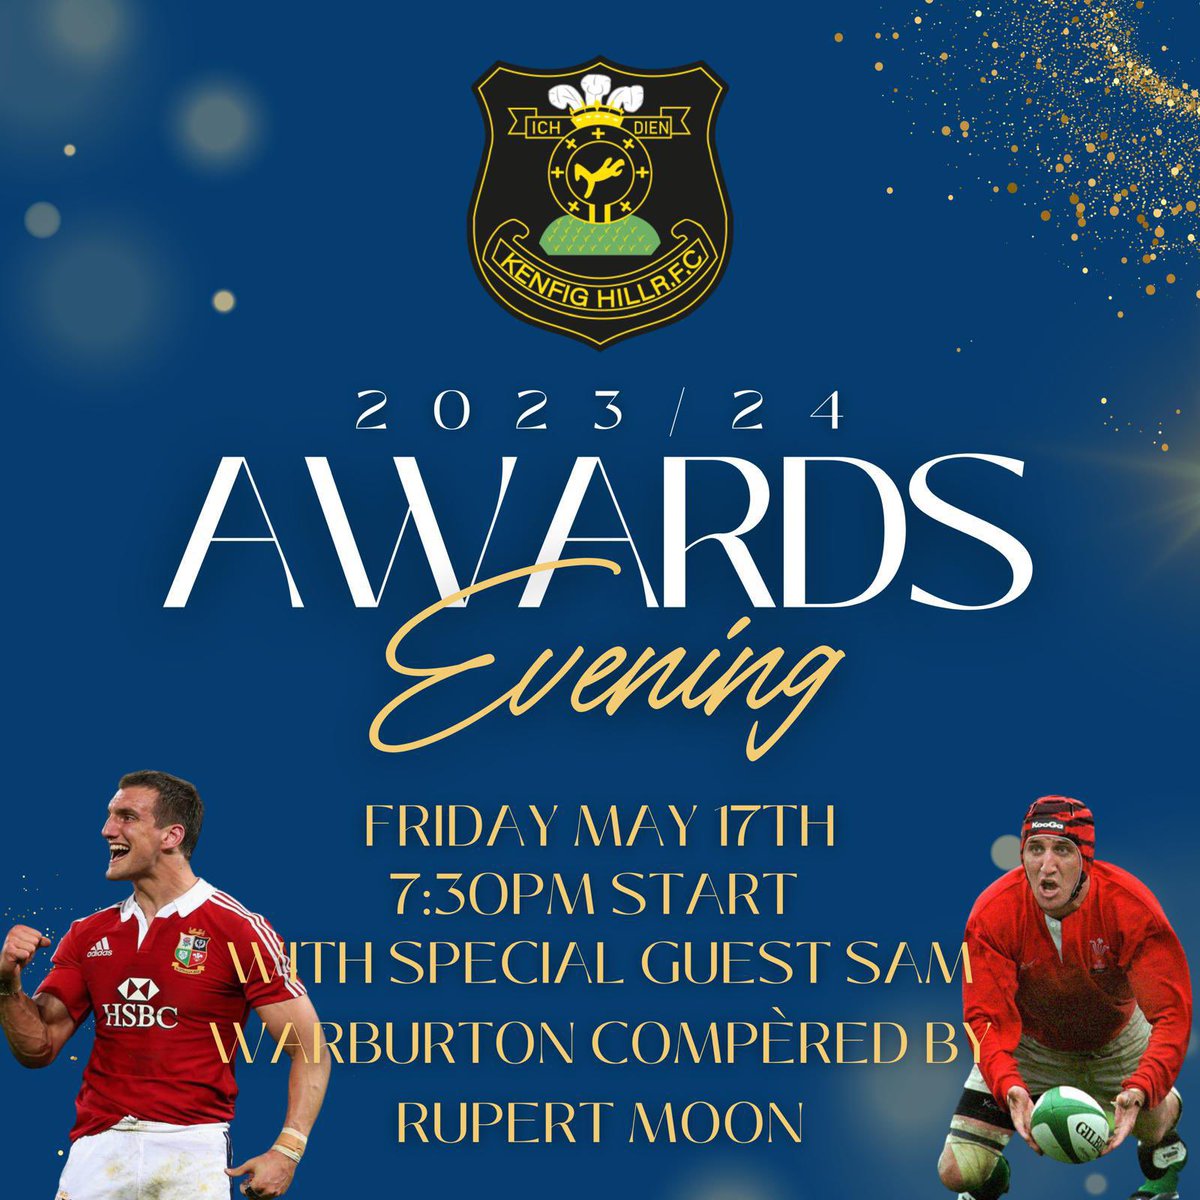 On Friday we officially bring season 2023/24 to an end with our Annual Senior Awards Evening. This year’s event will be compèred by Welsh international @rupertmoon and we are honoured to have @lionsofficial & Wales rugby great @samwarburton_ as our special guest. #HalaMules